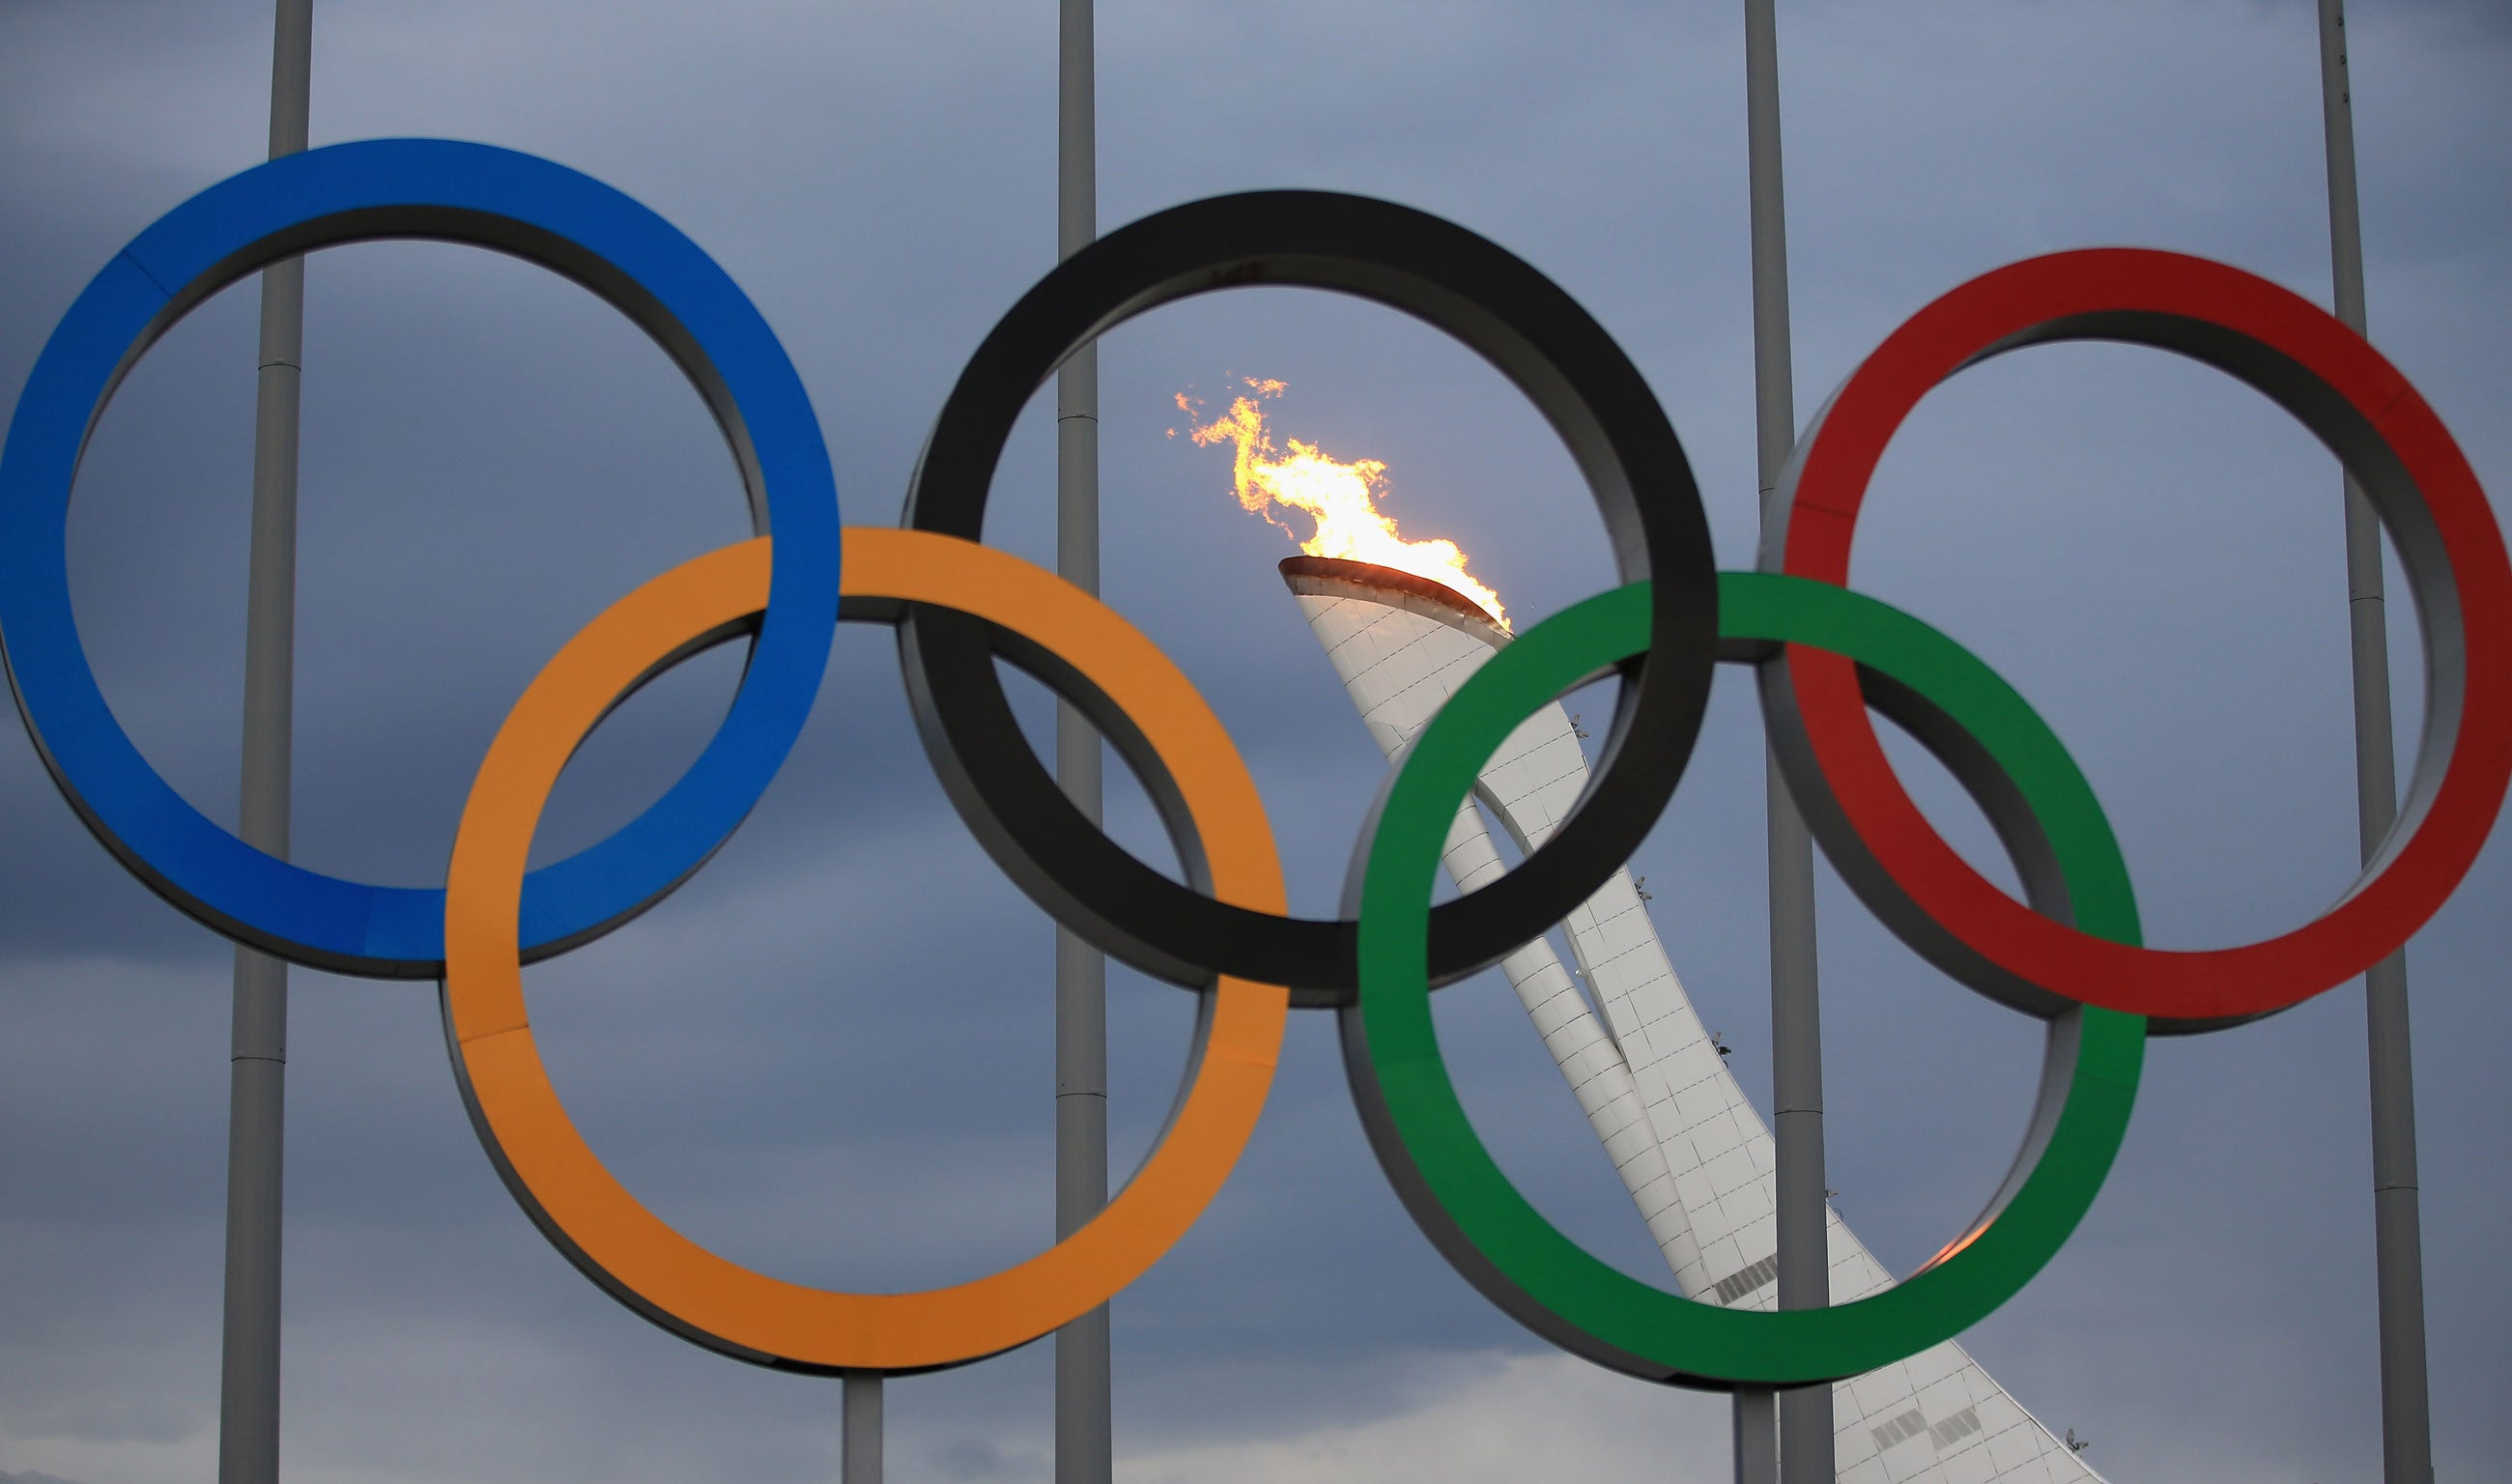 A picture of the Olympic rings in Sochi